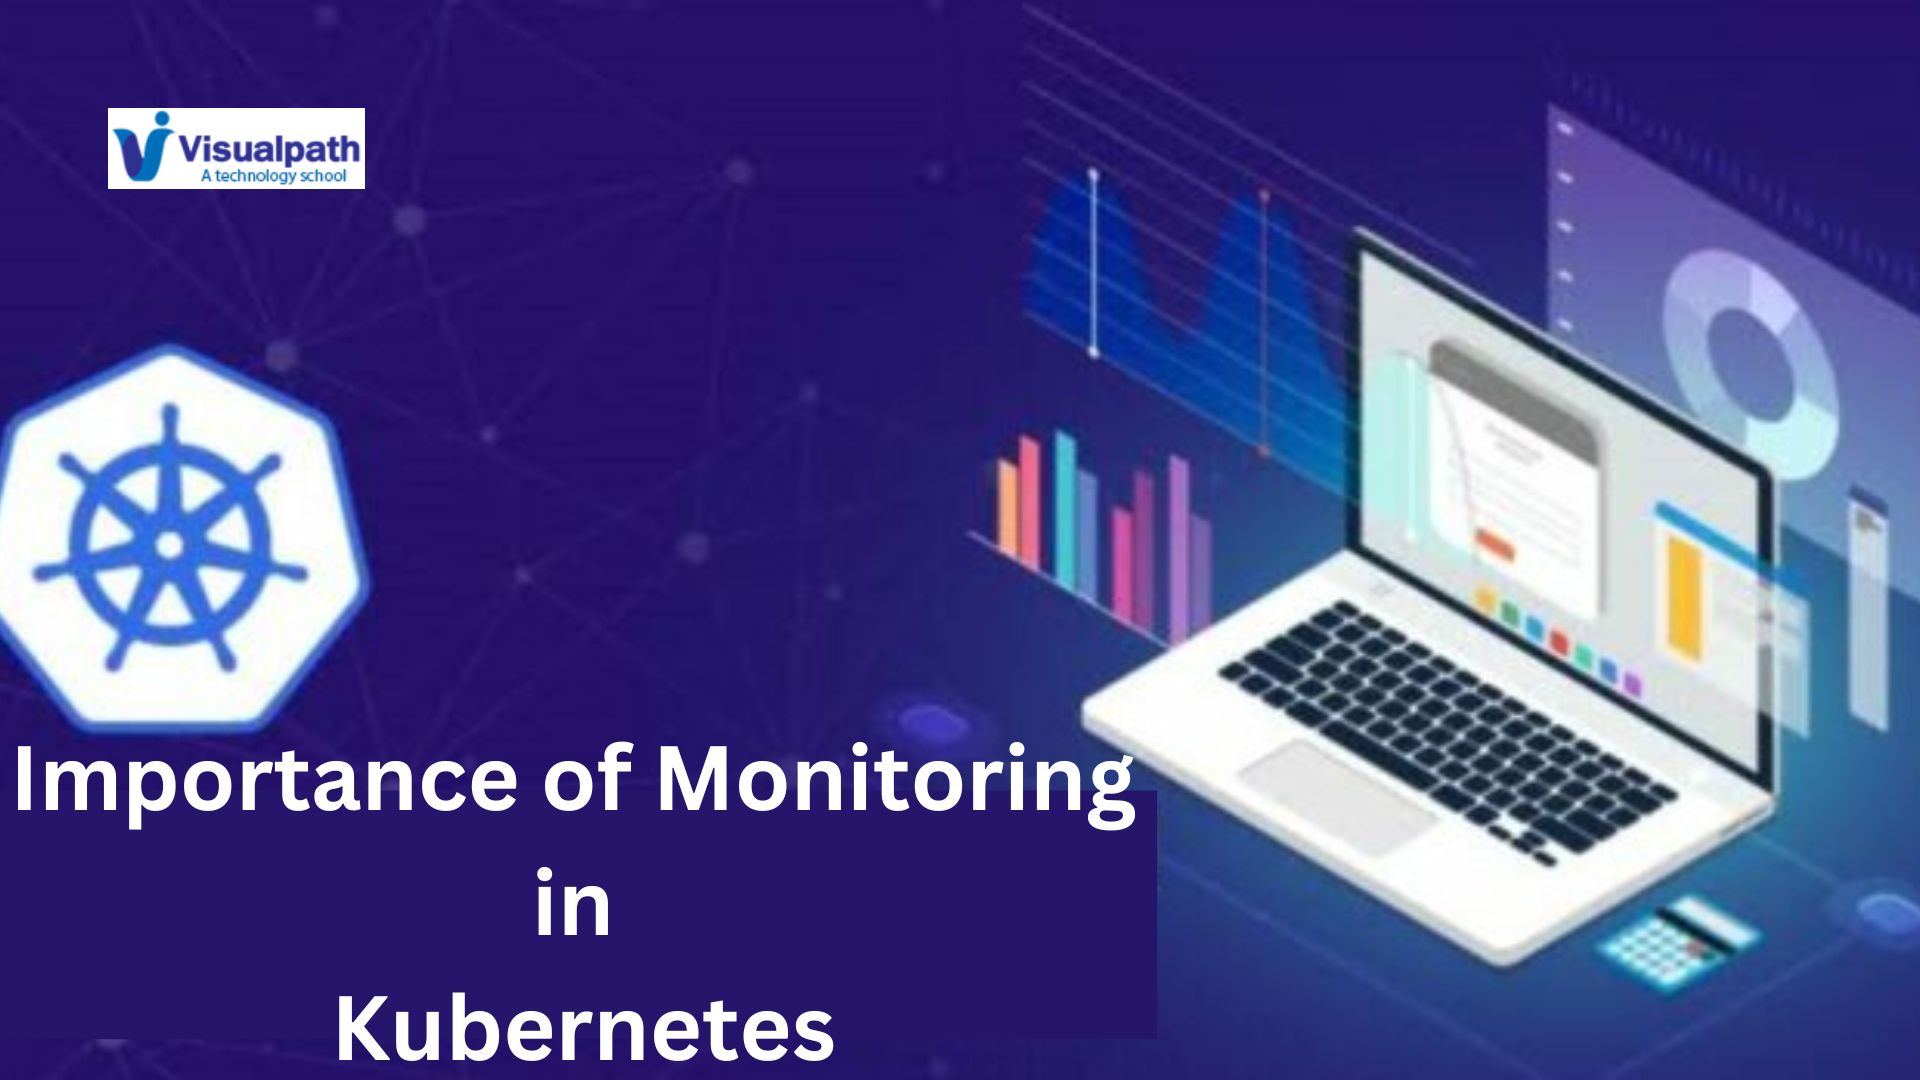 Why is monitoring important in Kubernetes?